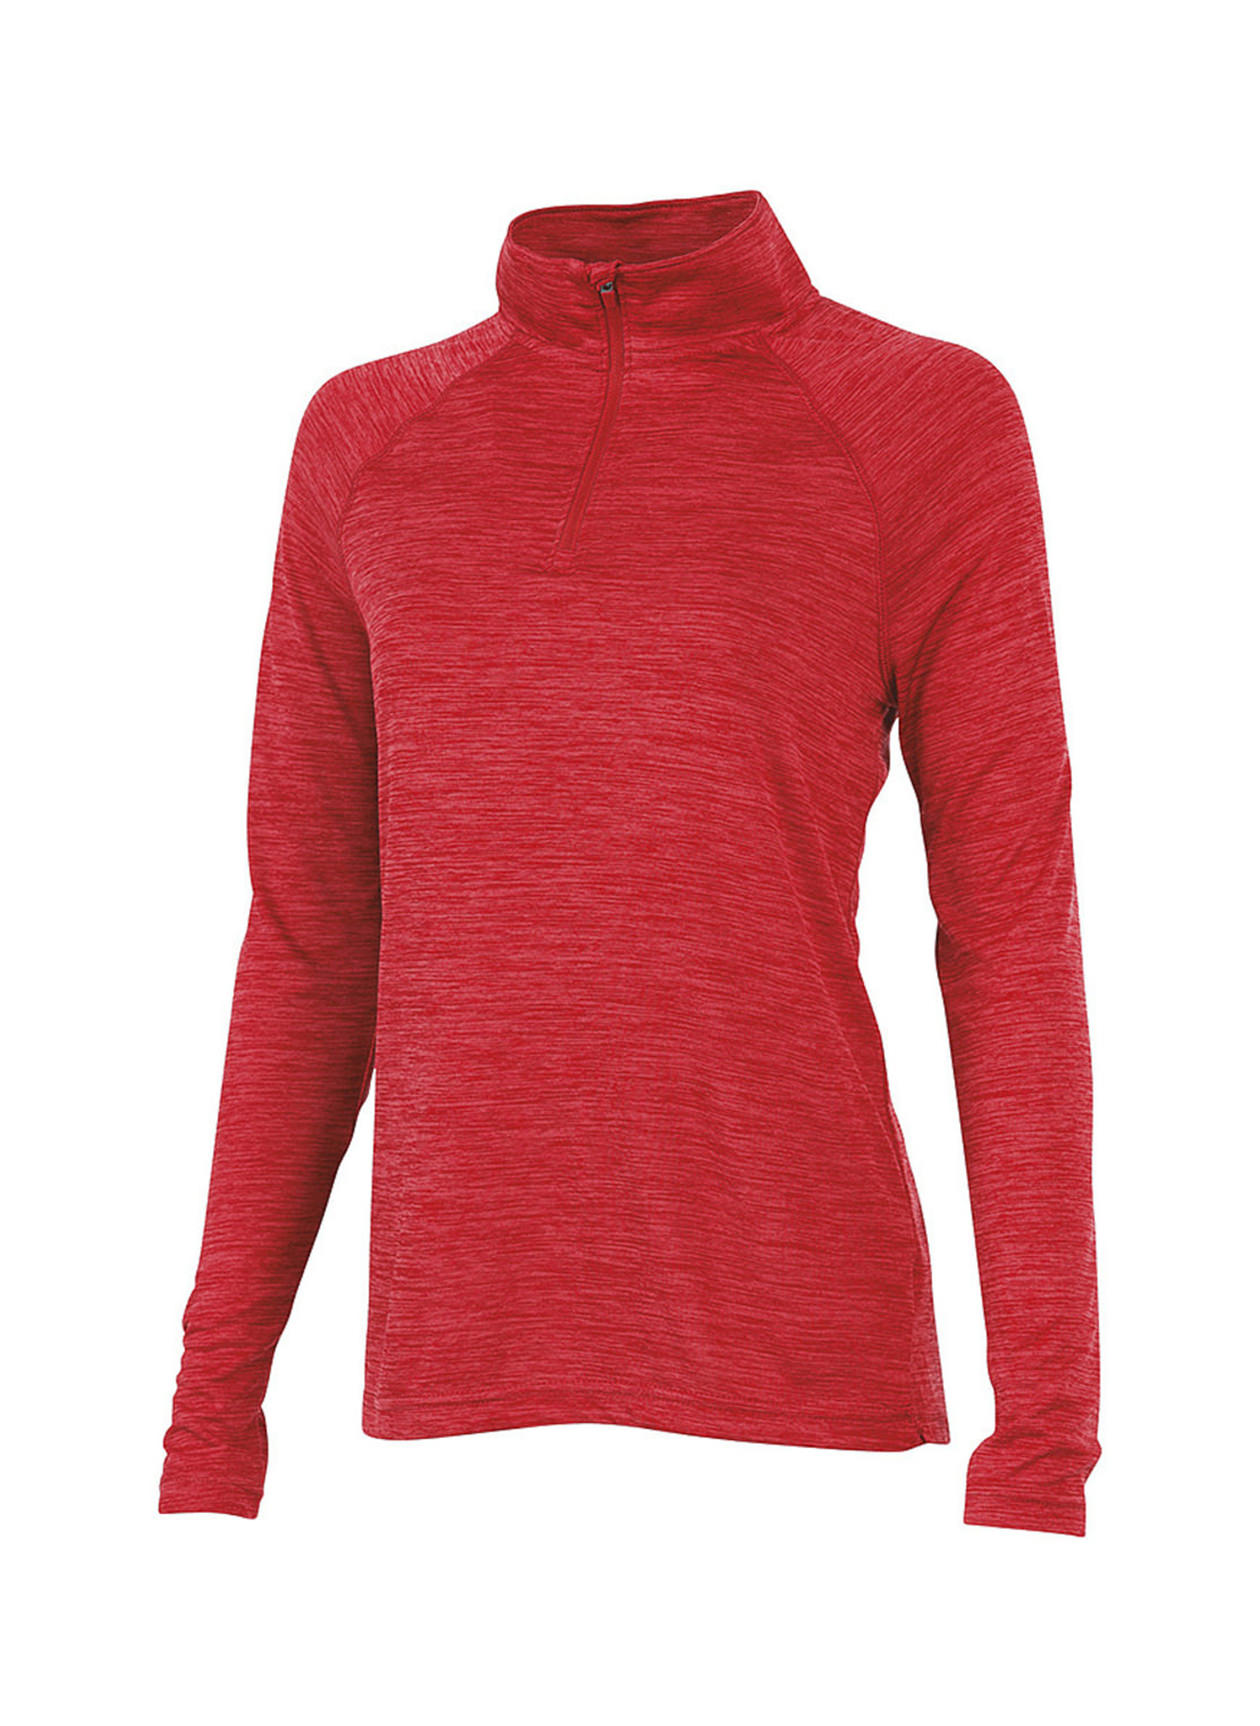 Charles River Women's Red Space Dyed Quarter-Zip